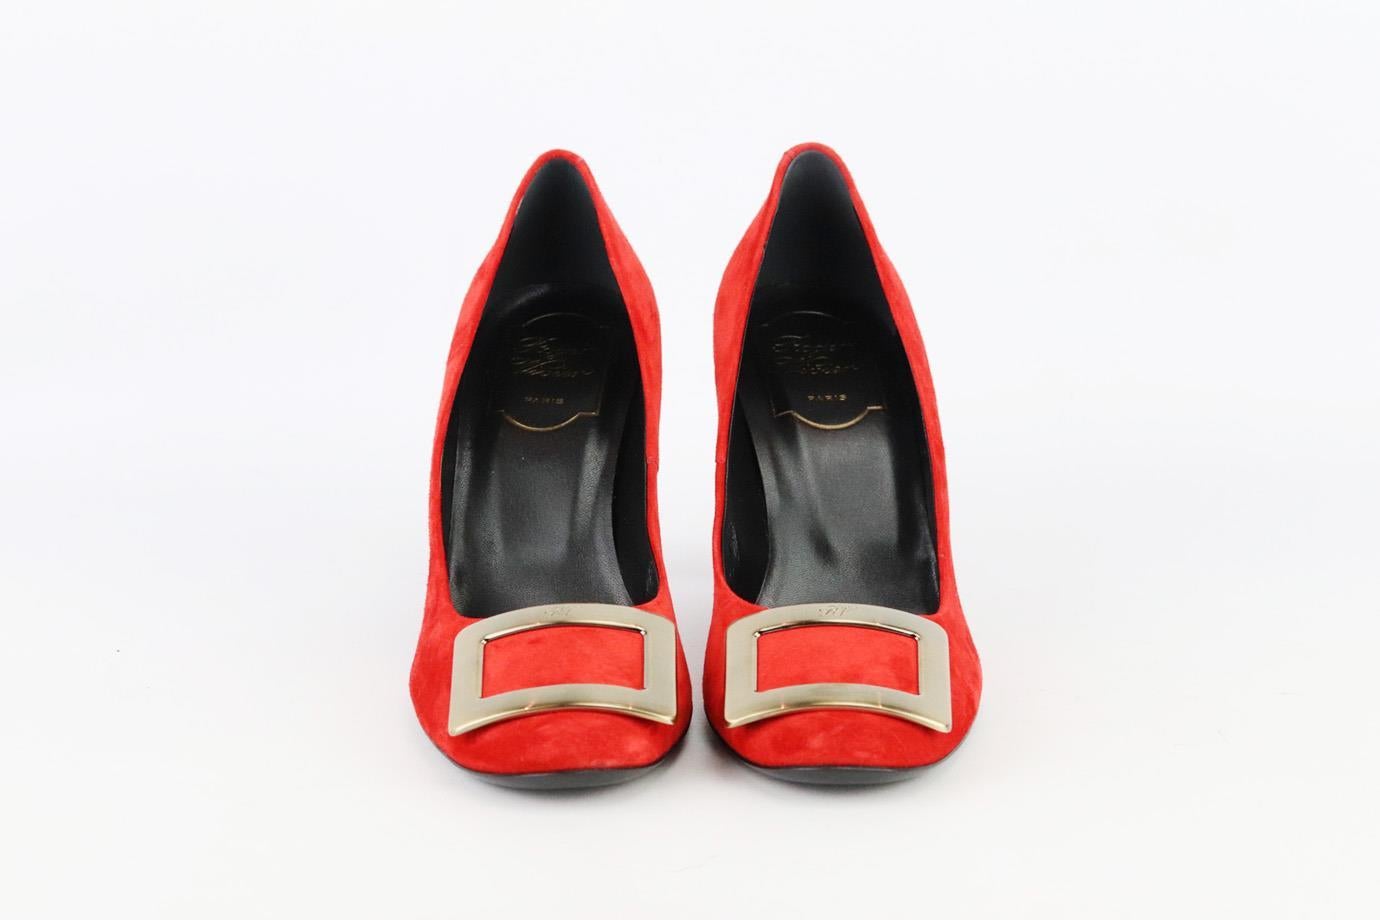 These pumps by Roger Vivier are an elegant re-creation of the founder's original 1965 design, they're made from red patent-leather and embellished with a gold-tone signature buckle that tops the rounded toe. Heel measures approximately 63 mm/ 2.5